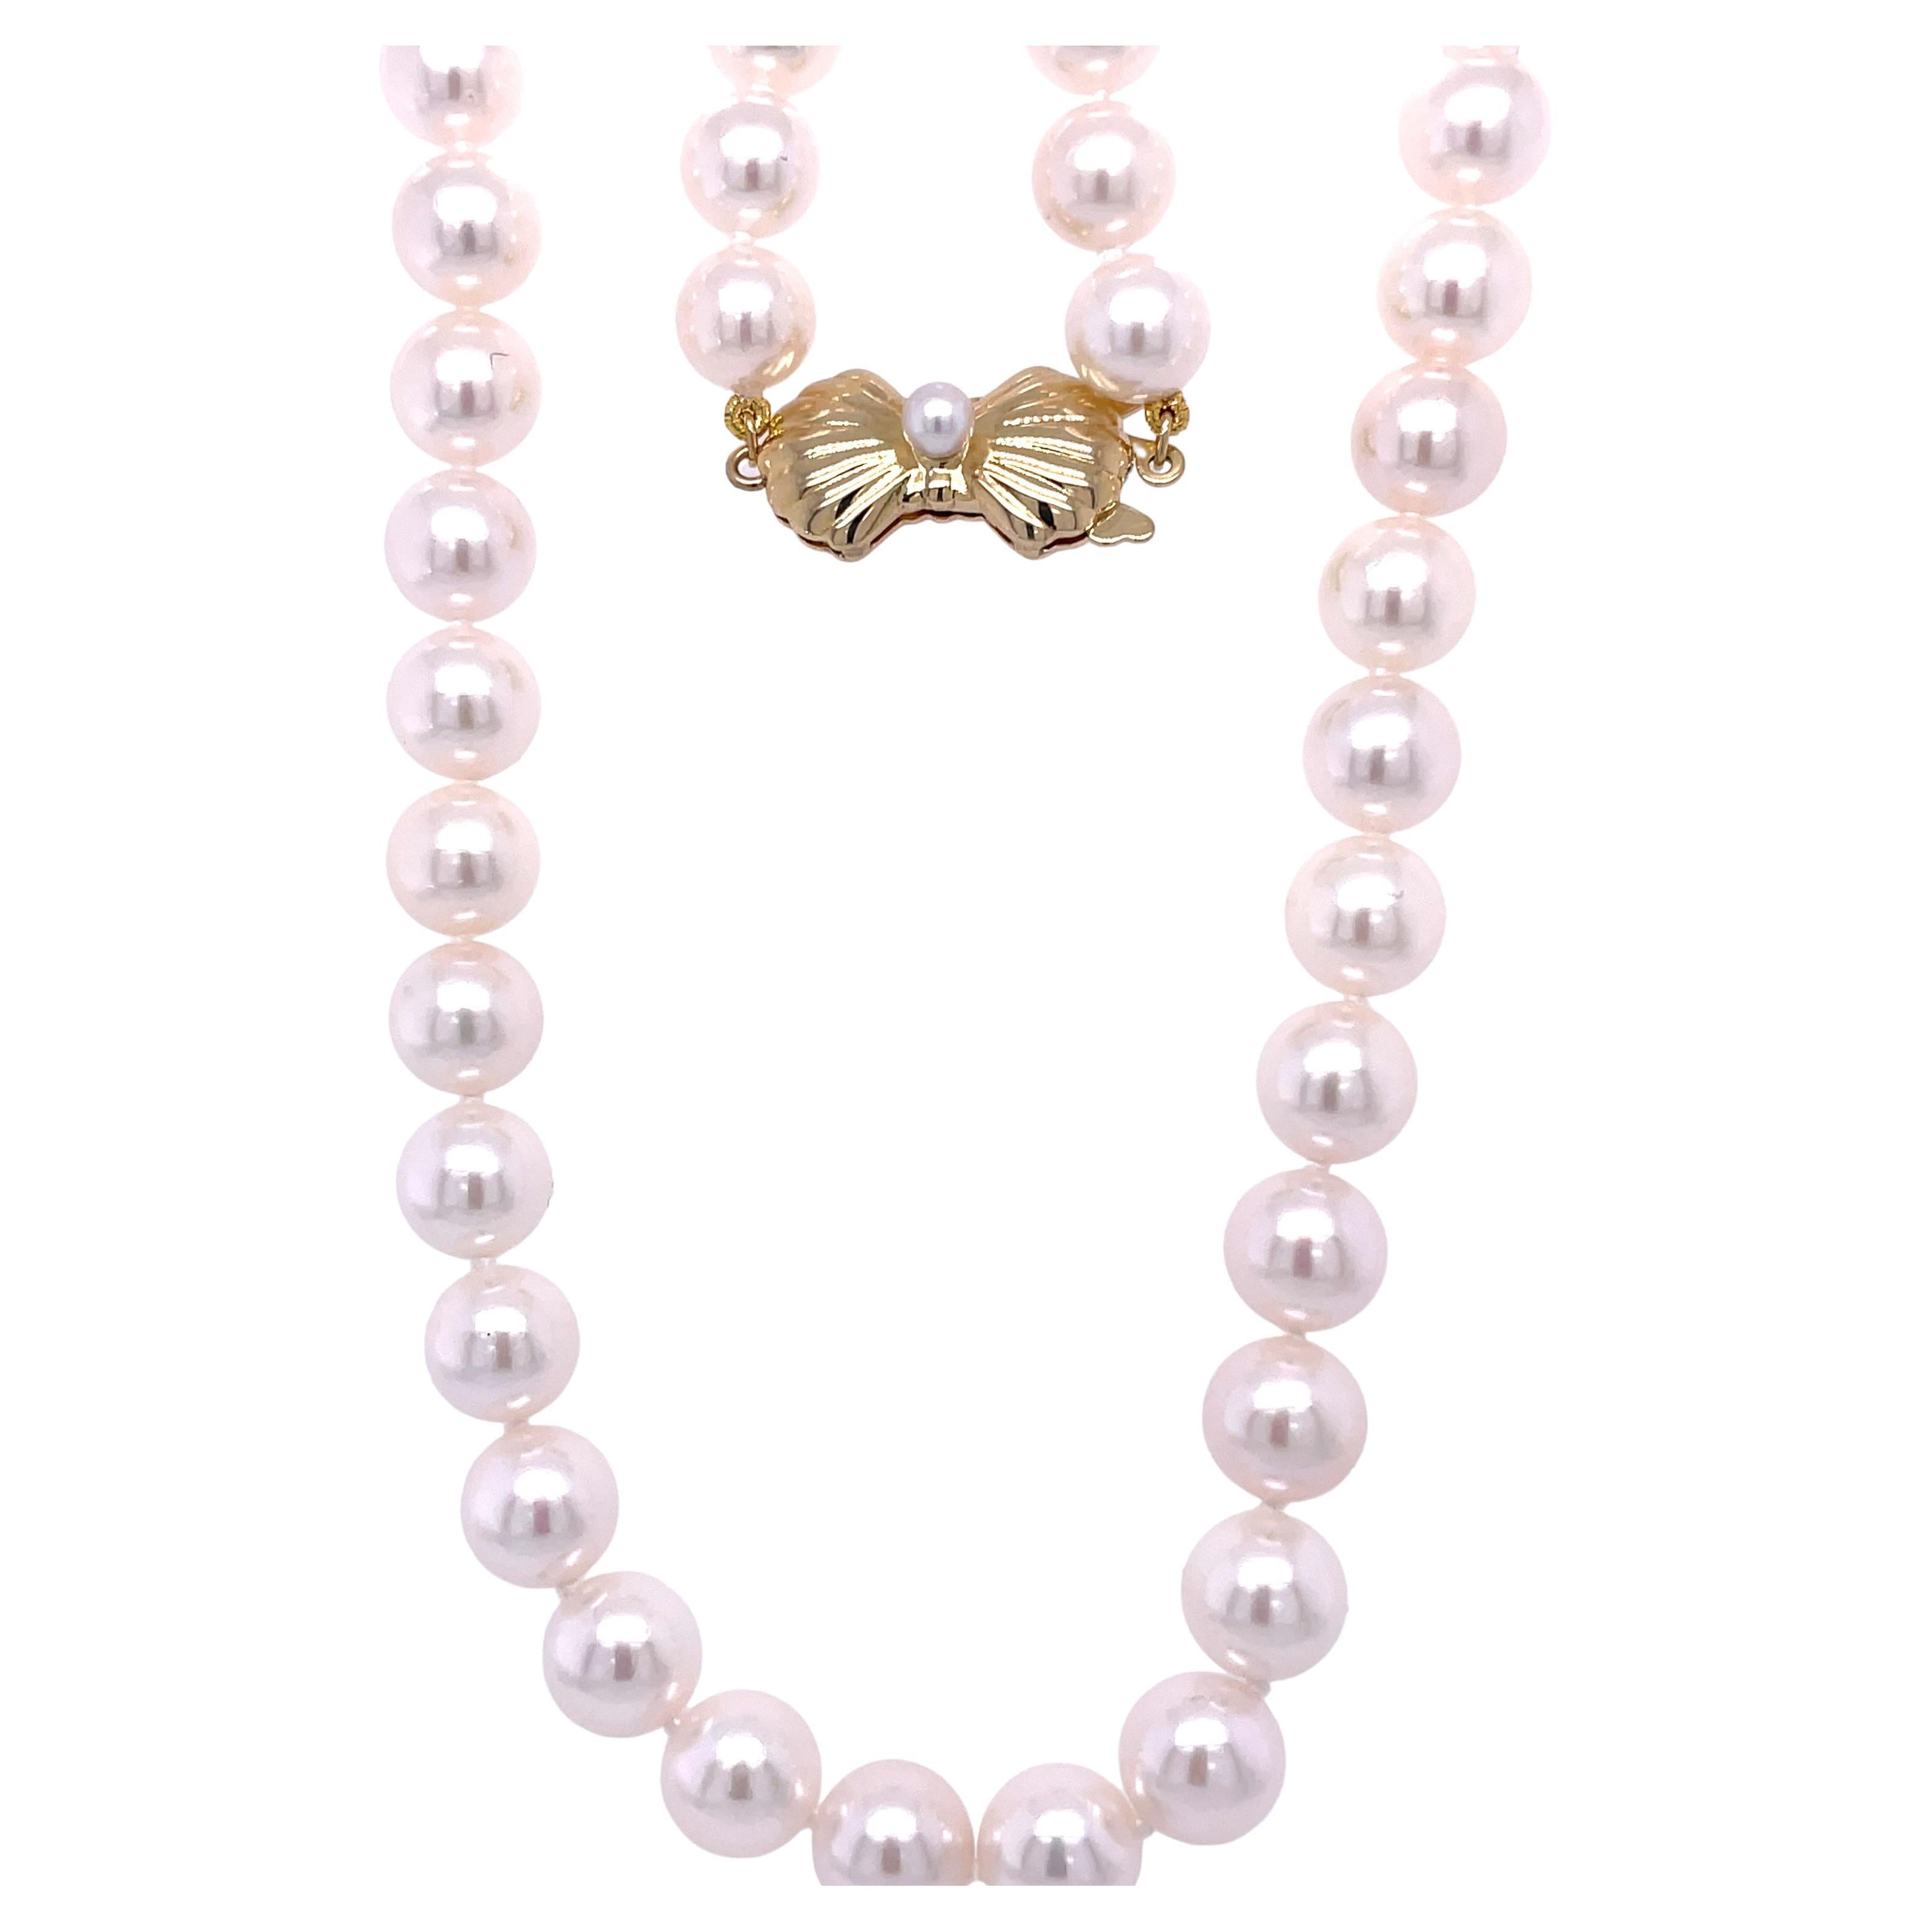 Mikimoto "Blue Lagoon" Pearl Necklace with Gold Clasp